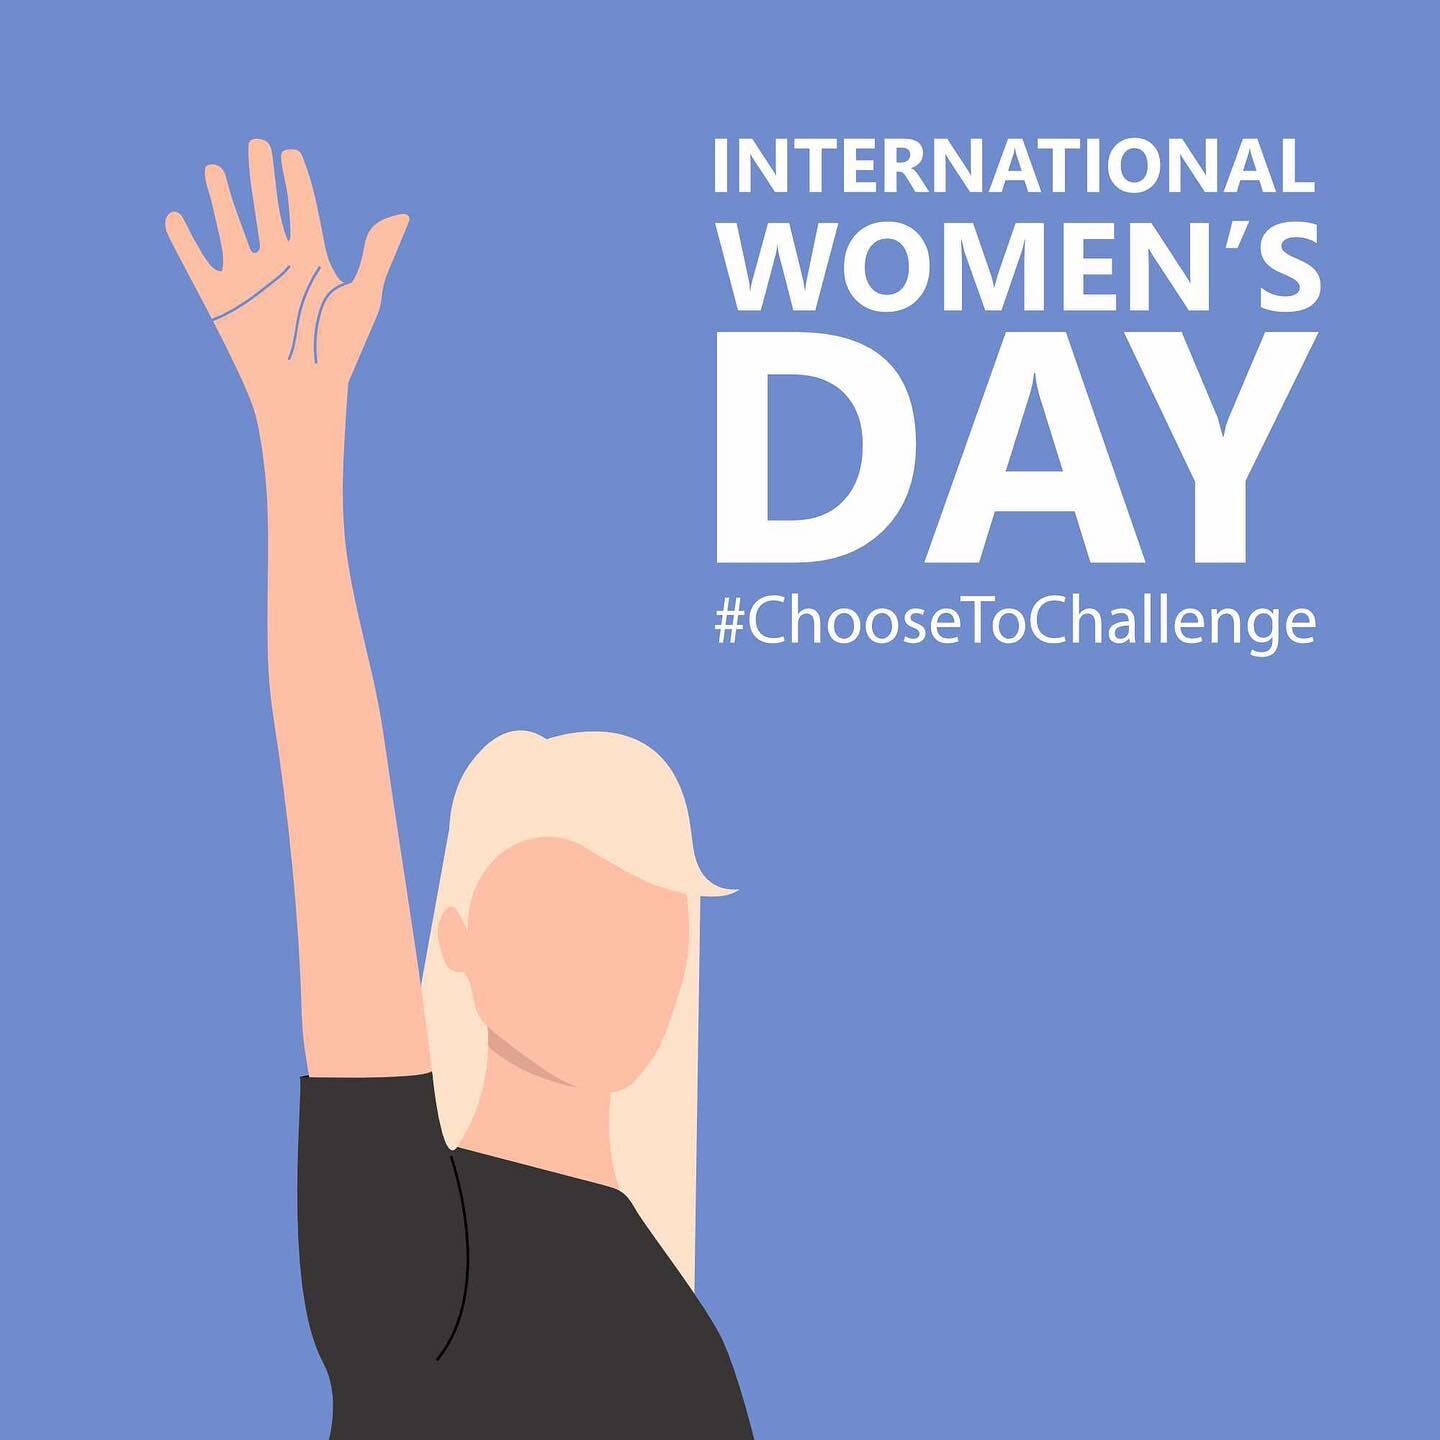 Happy International Women&rsquo;s Day to all the incredible women out there, including the wonderful women who make our community what it is. Today and every day we #choosetochallenge inequality, call out bias, question stereotypes, and help forge an